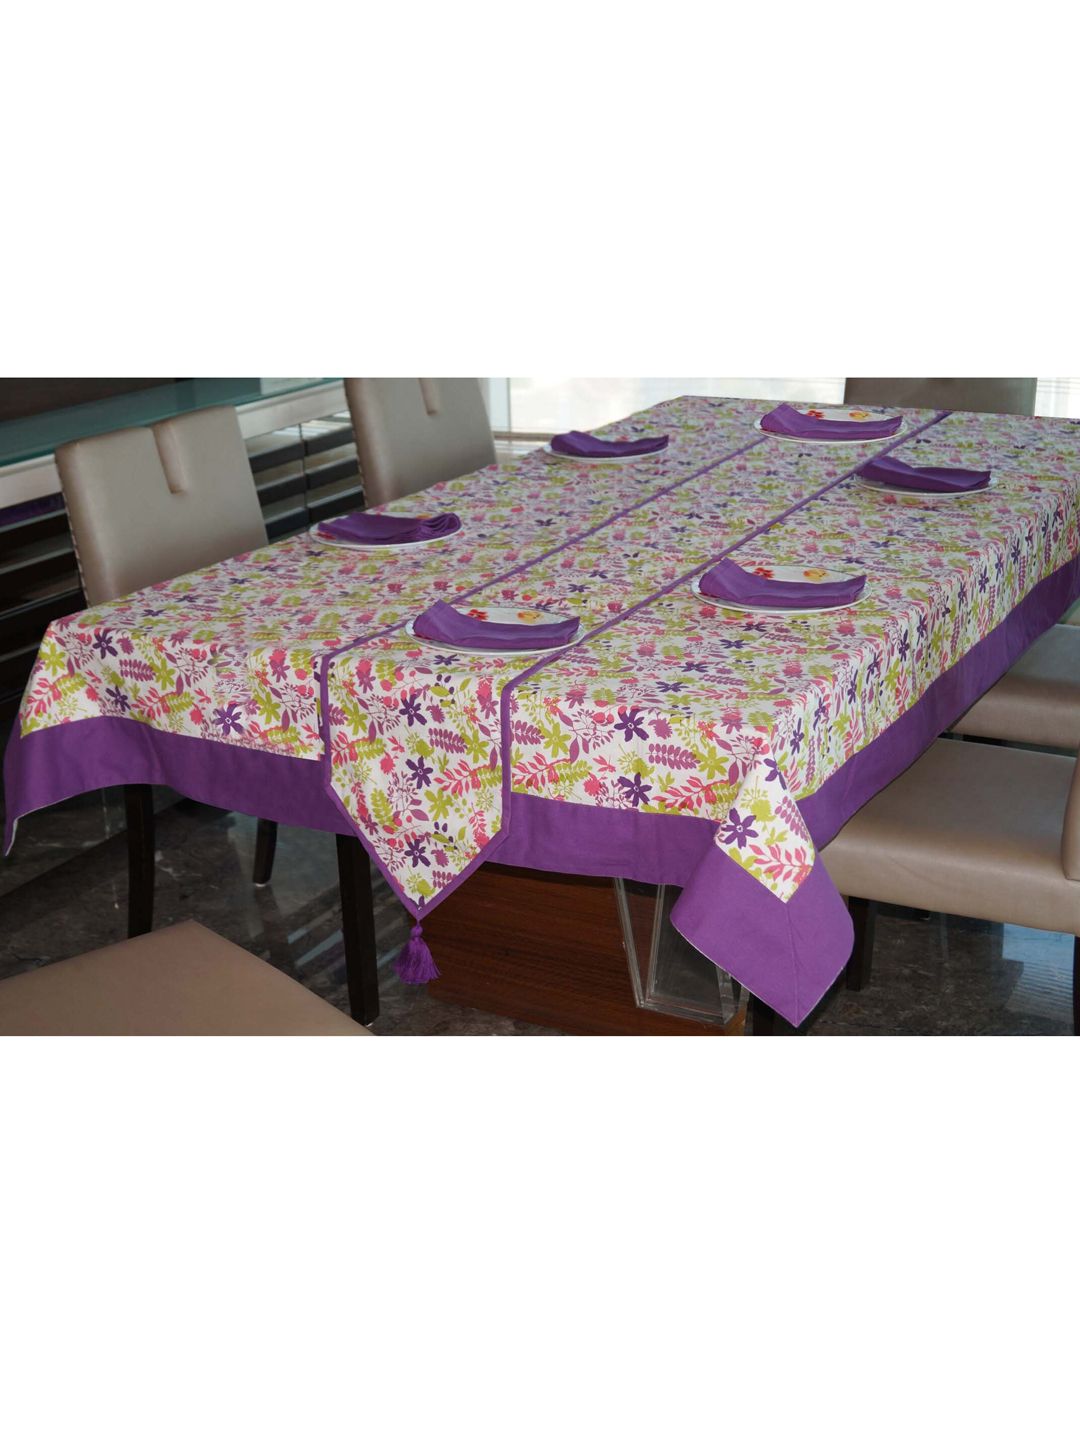 Lushomes Purple & White Floral Printed Table Linen Set Price in India